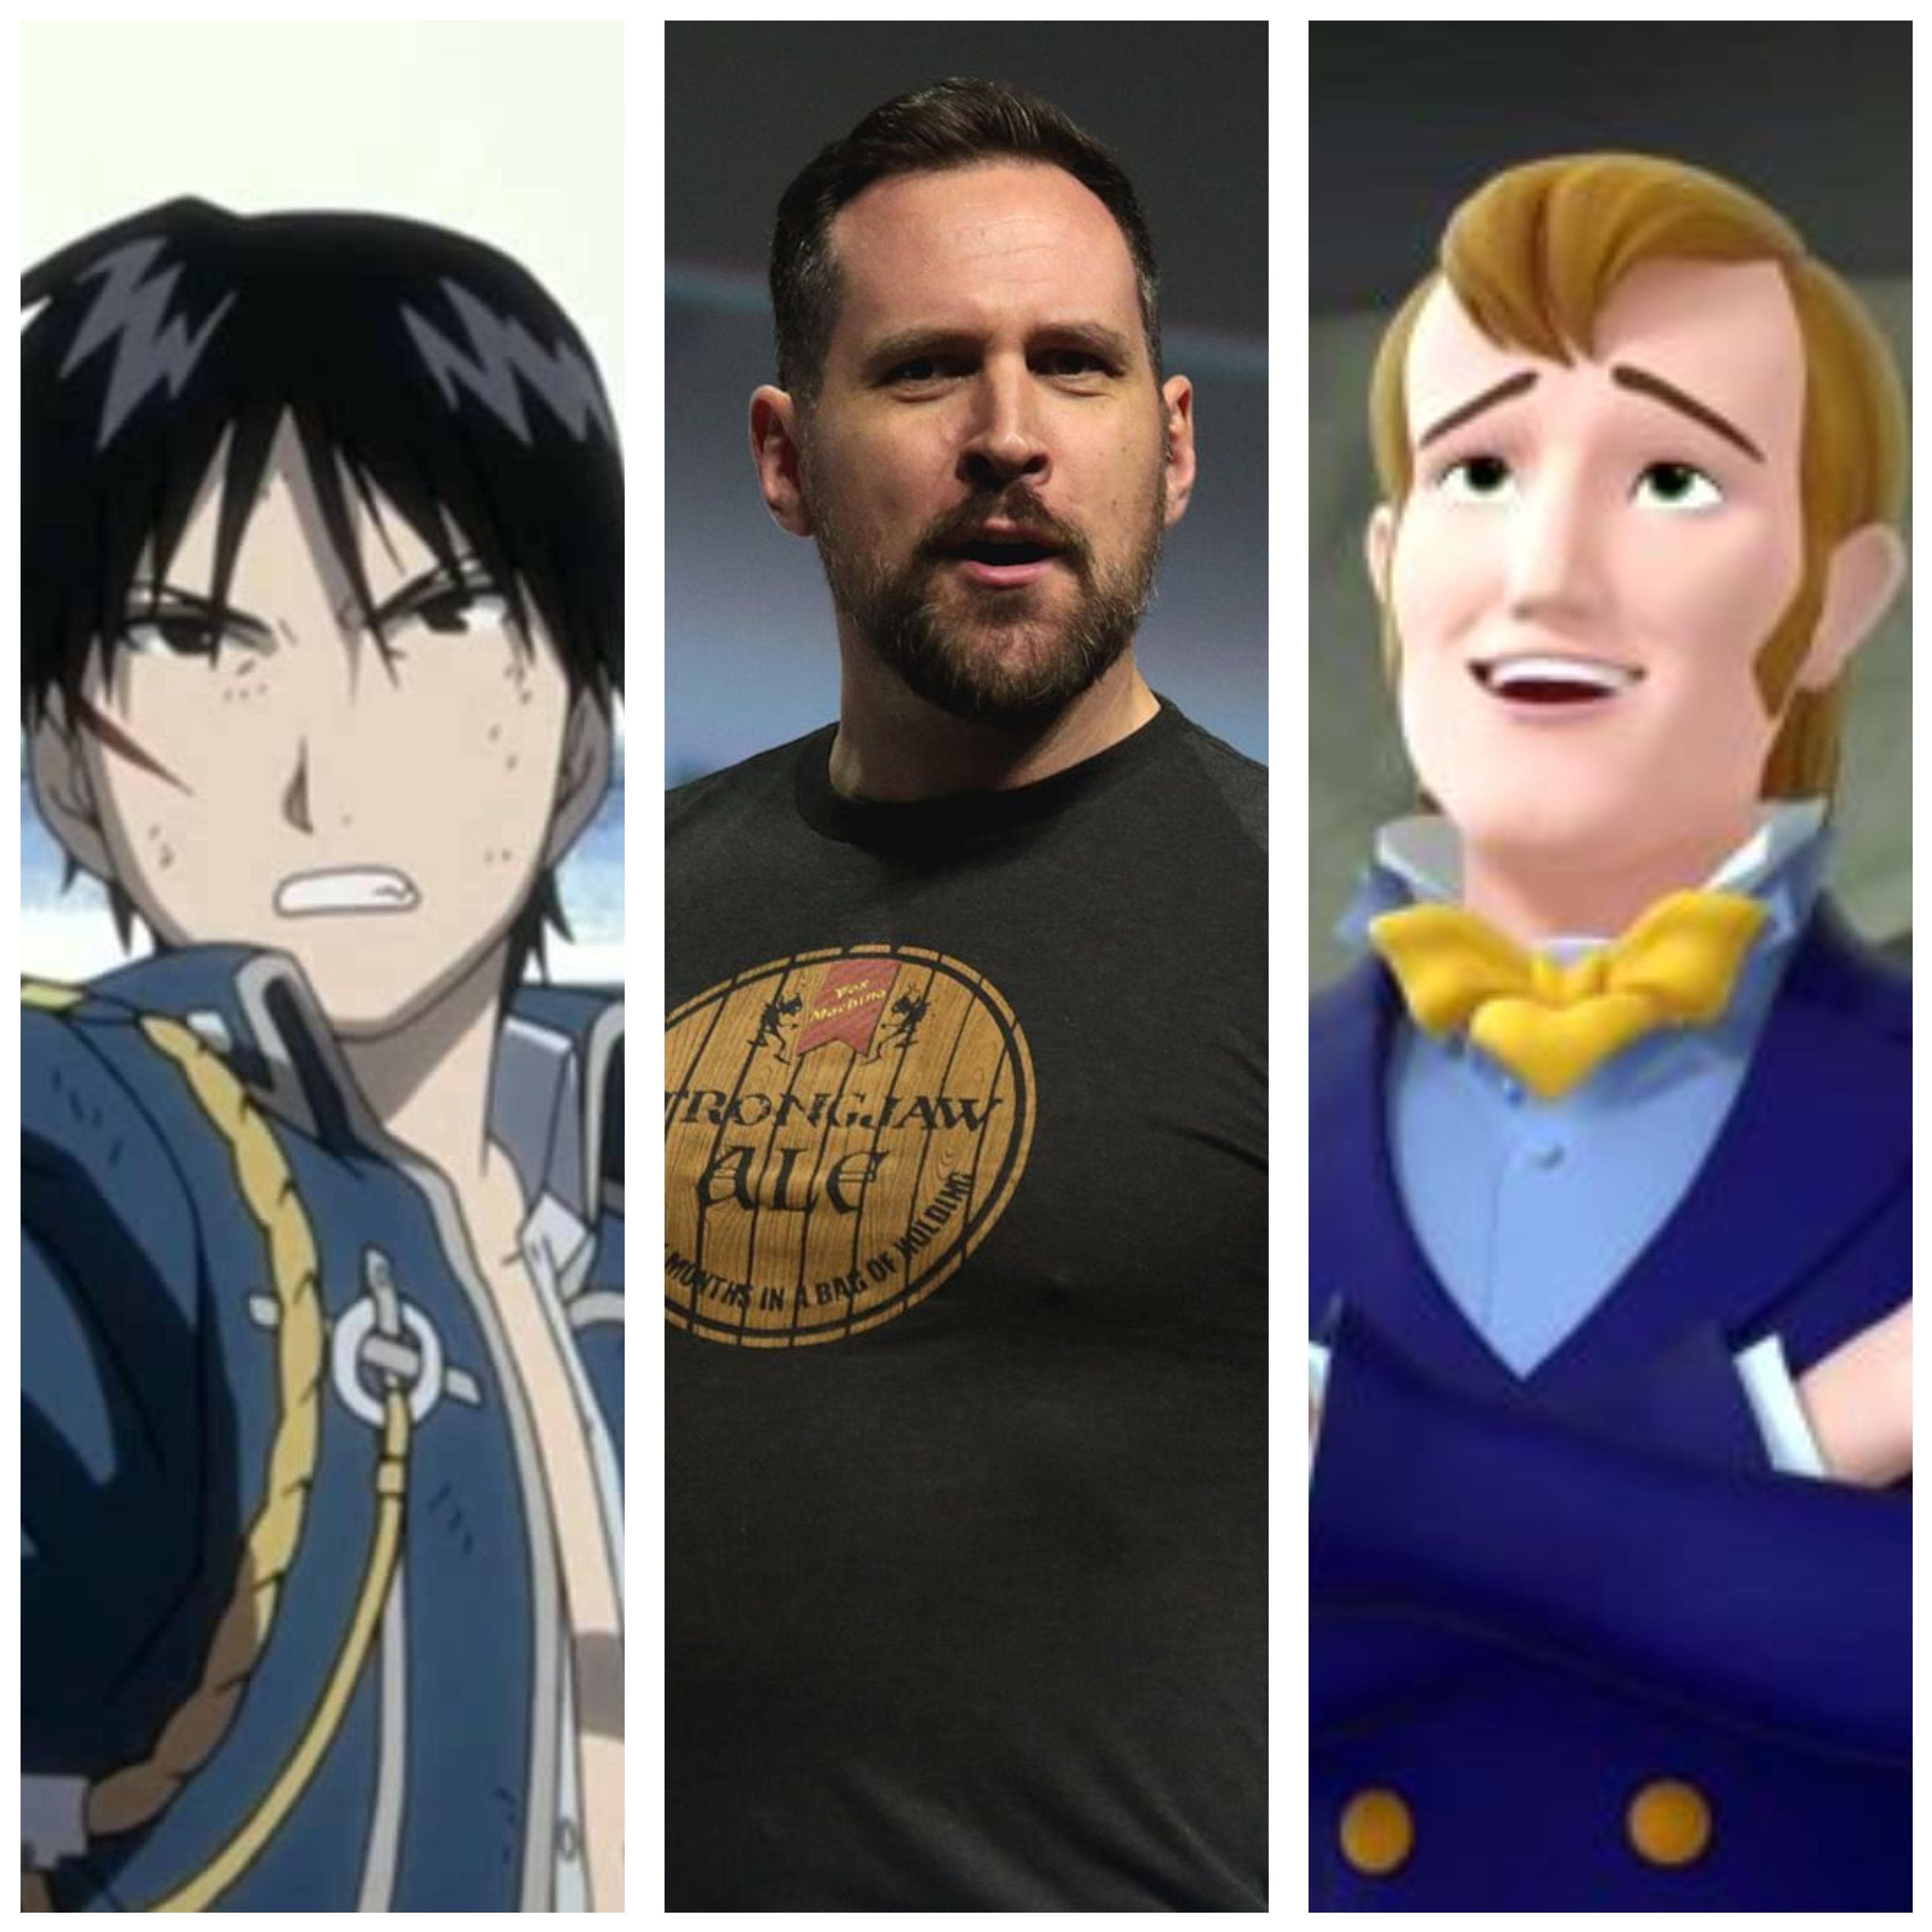 The Amazing World of Animation! — Request: Voice-actors and who they voice